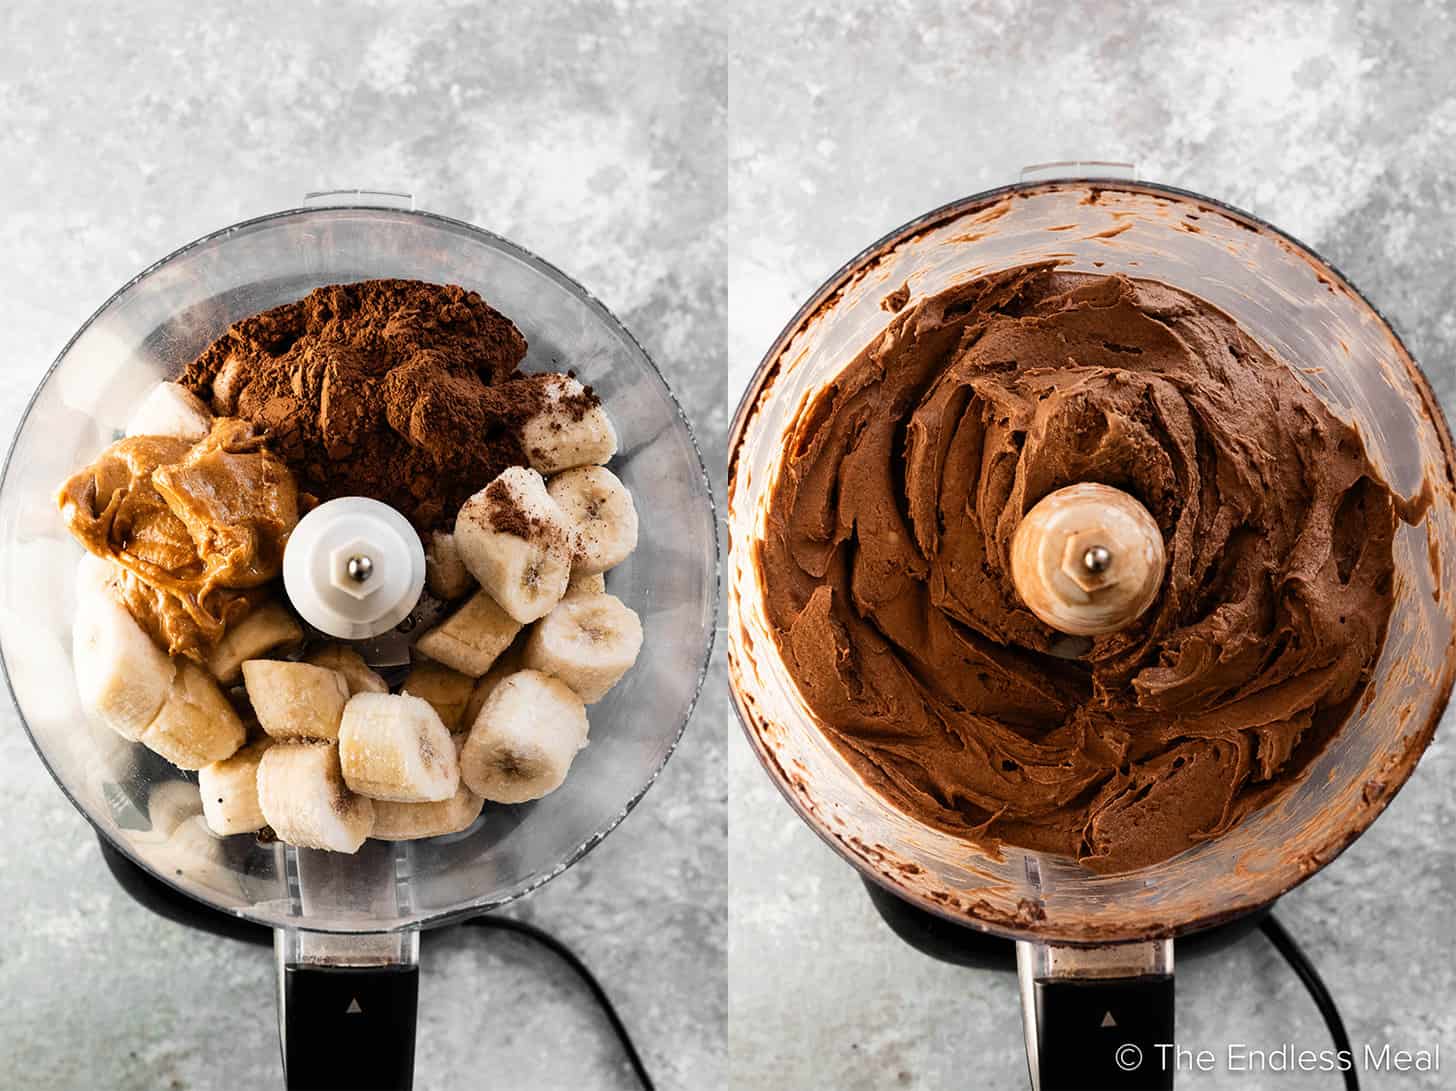 Two pictures showing how to make Chocolate Banana Ice Cream in a food processor